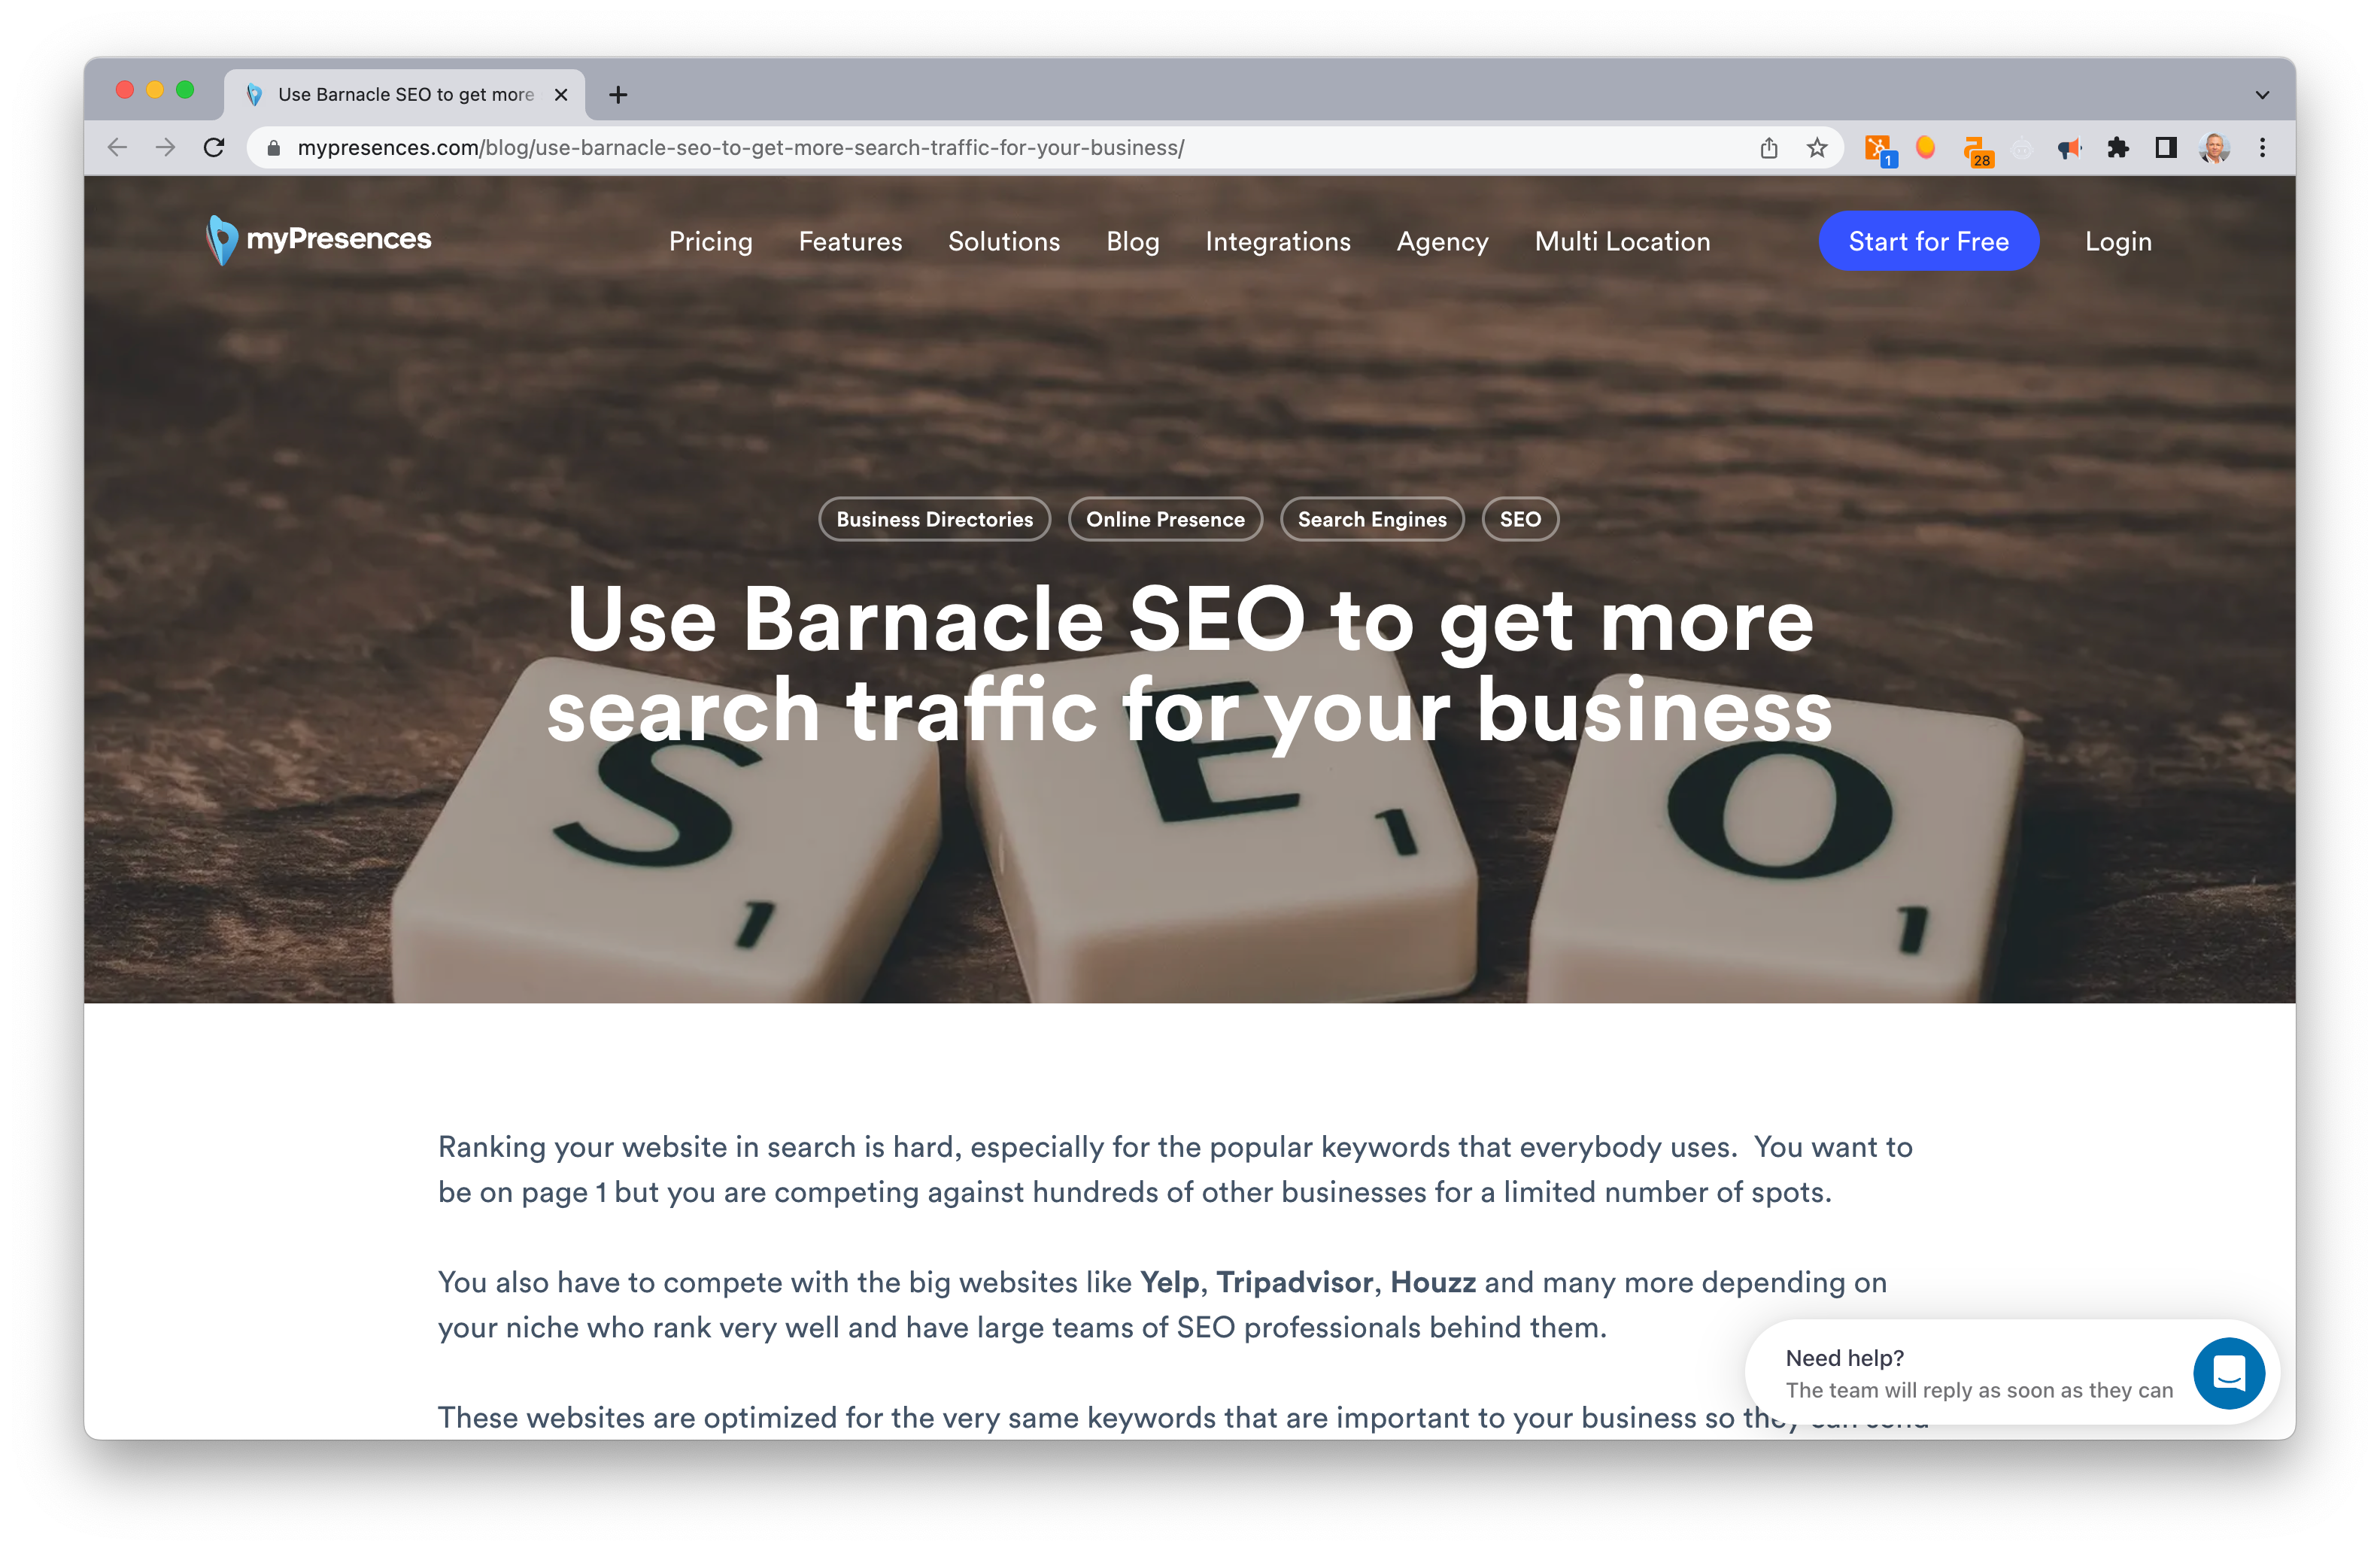 Screen Shot: Use Barnacle SEO to Get More Search Traffic for Your Business